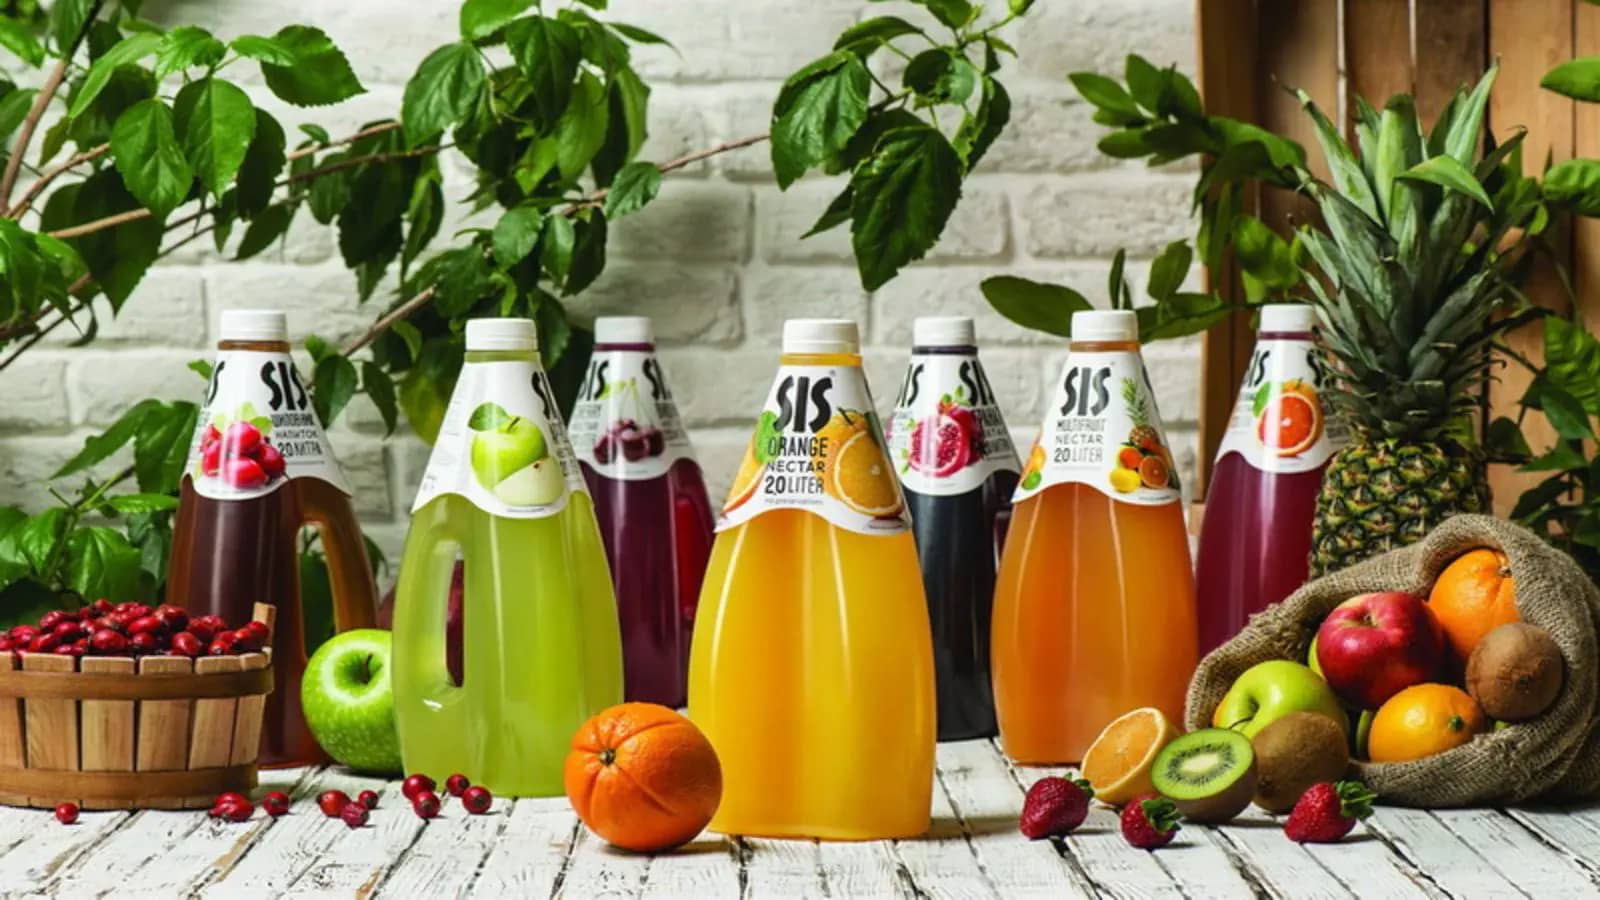 Armenian juice company SIS Natural strengthens growth and productivity with EBRD support